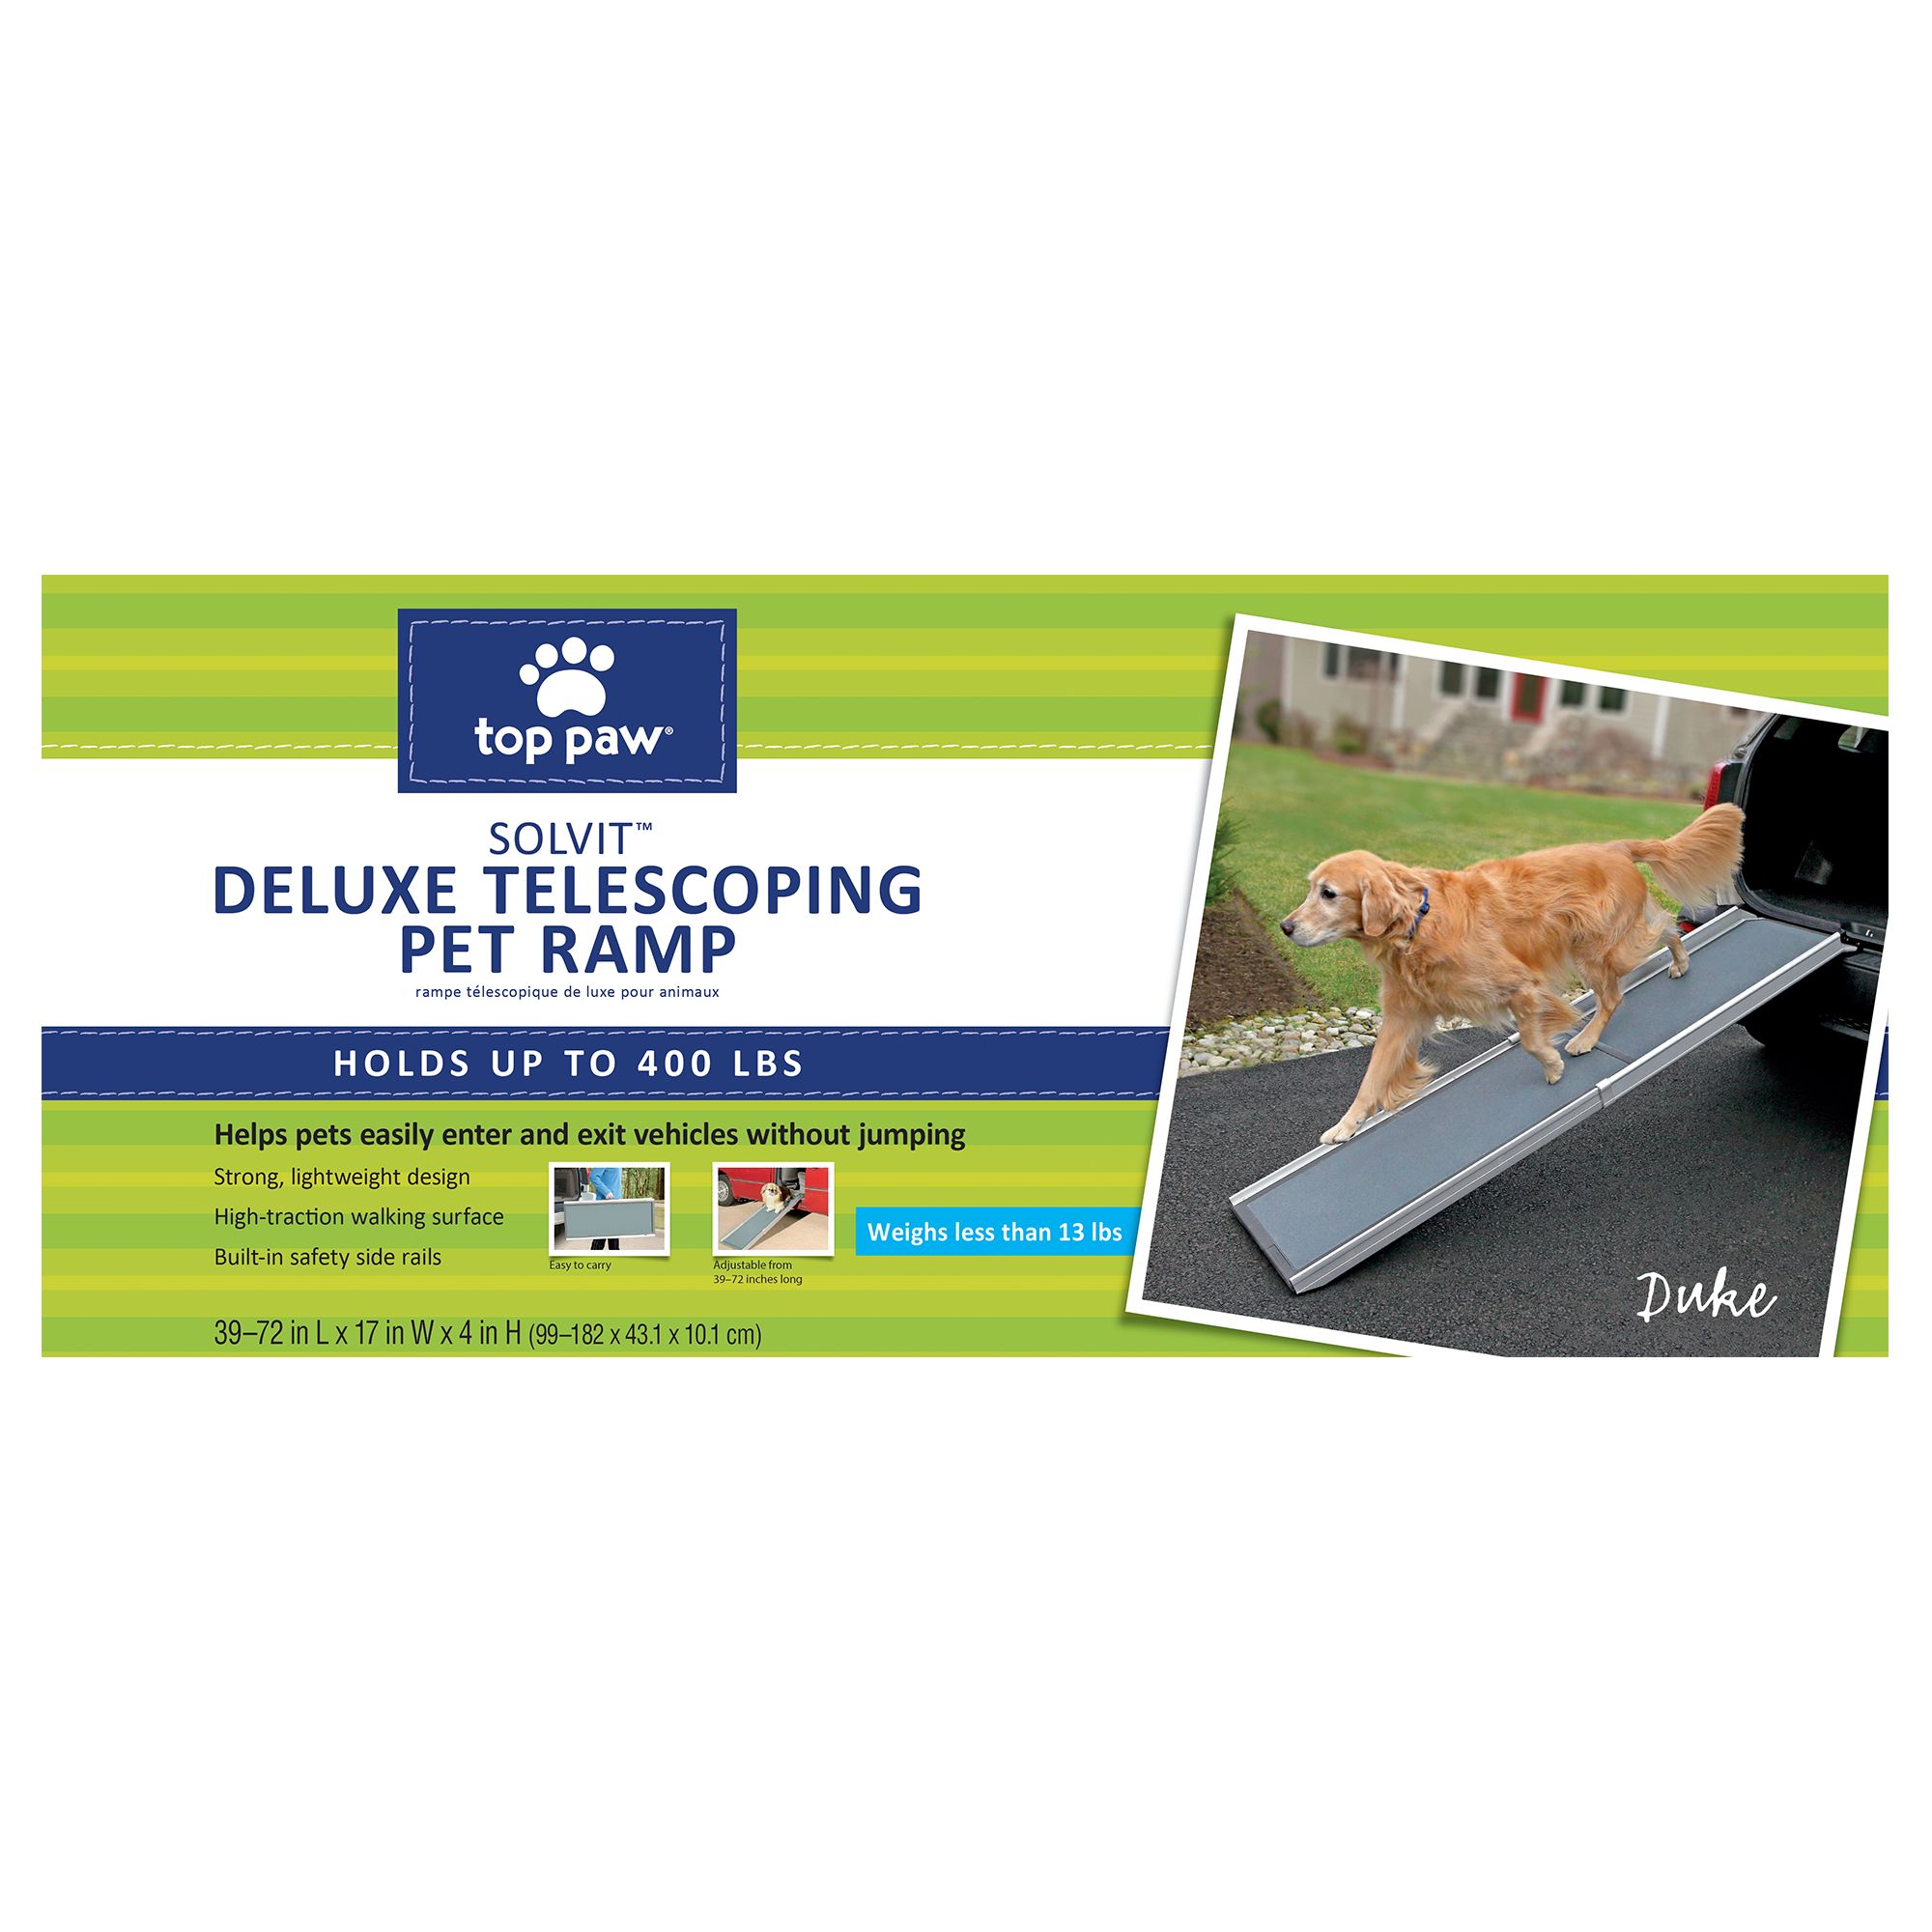 Adjustable No Slip Pet Ramps for All Dogs and Cats Up to 250 lbs Heavy Duty Dog Ramp Comfortably Help Your Beloved Pets to Safely Get Up Right Next to Your Side 